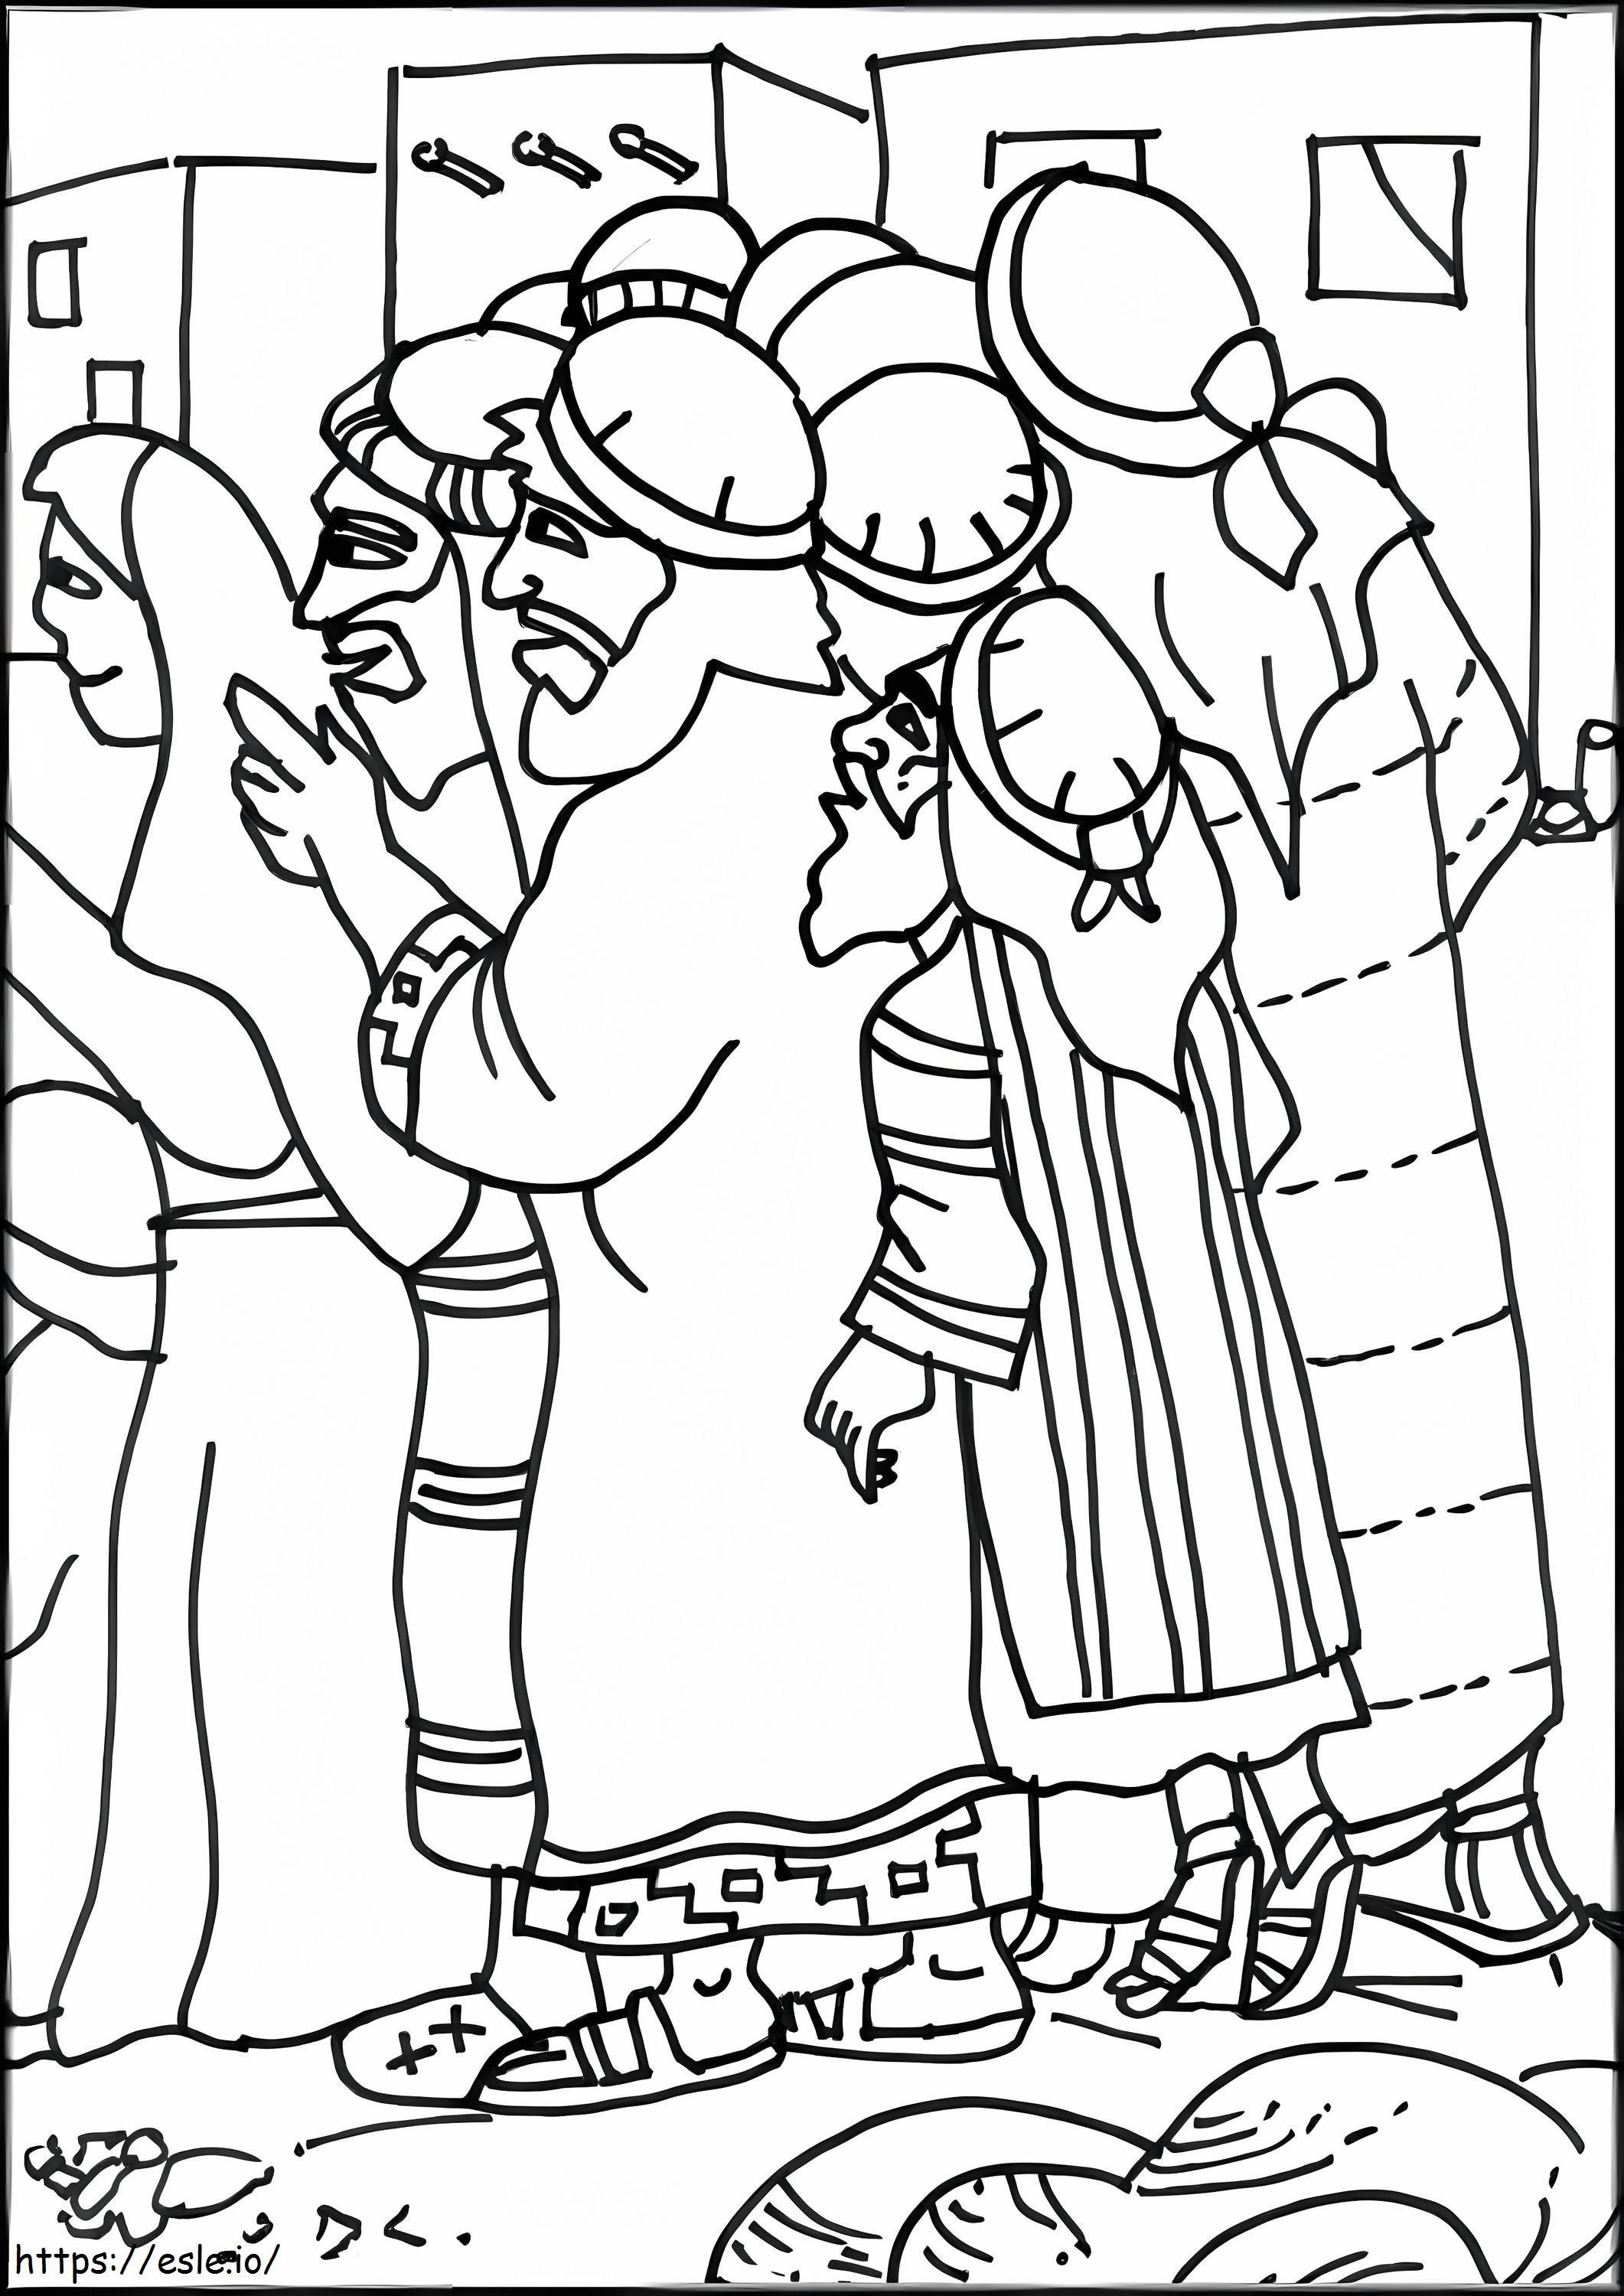 Zacchaeus And The People coloring page